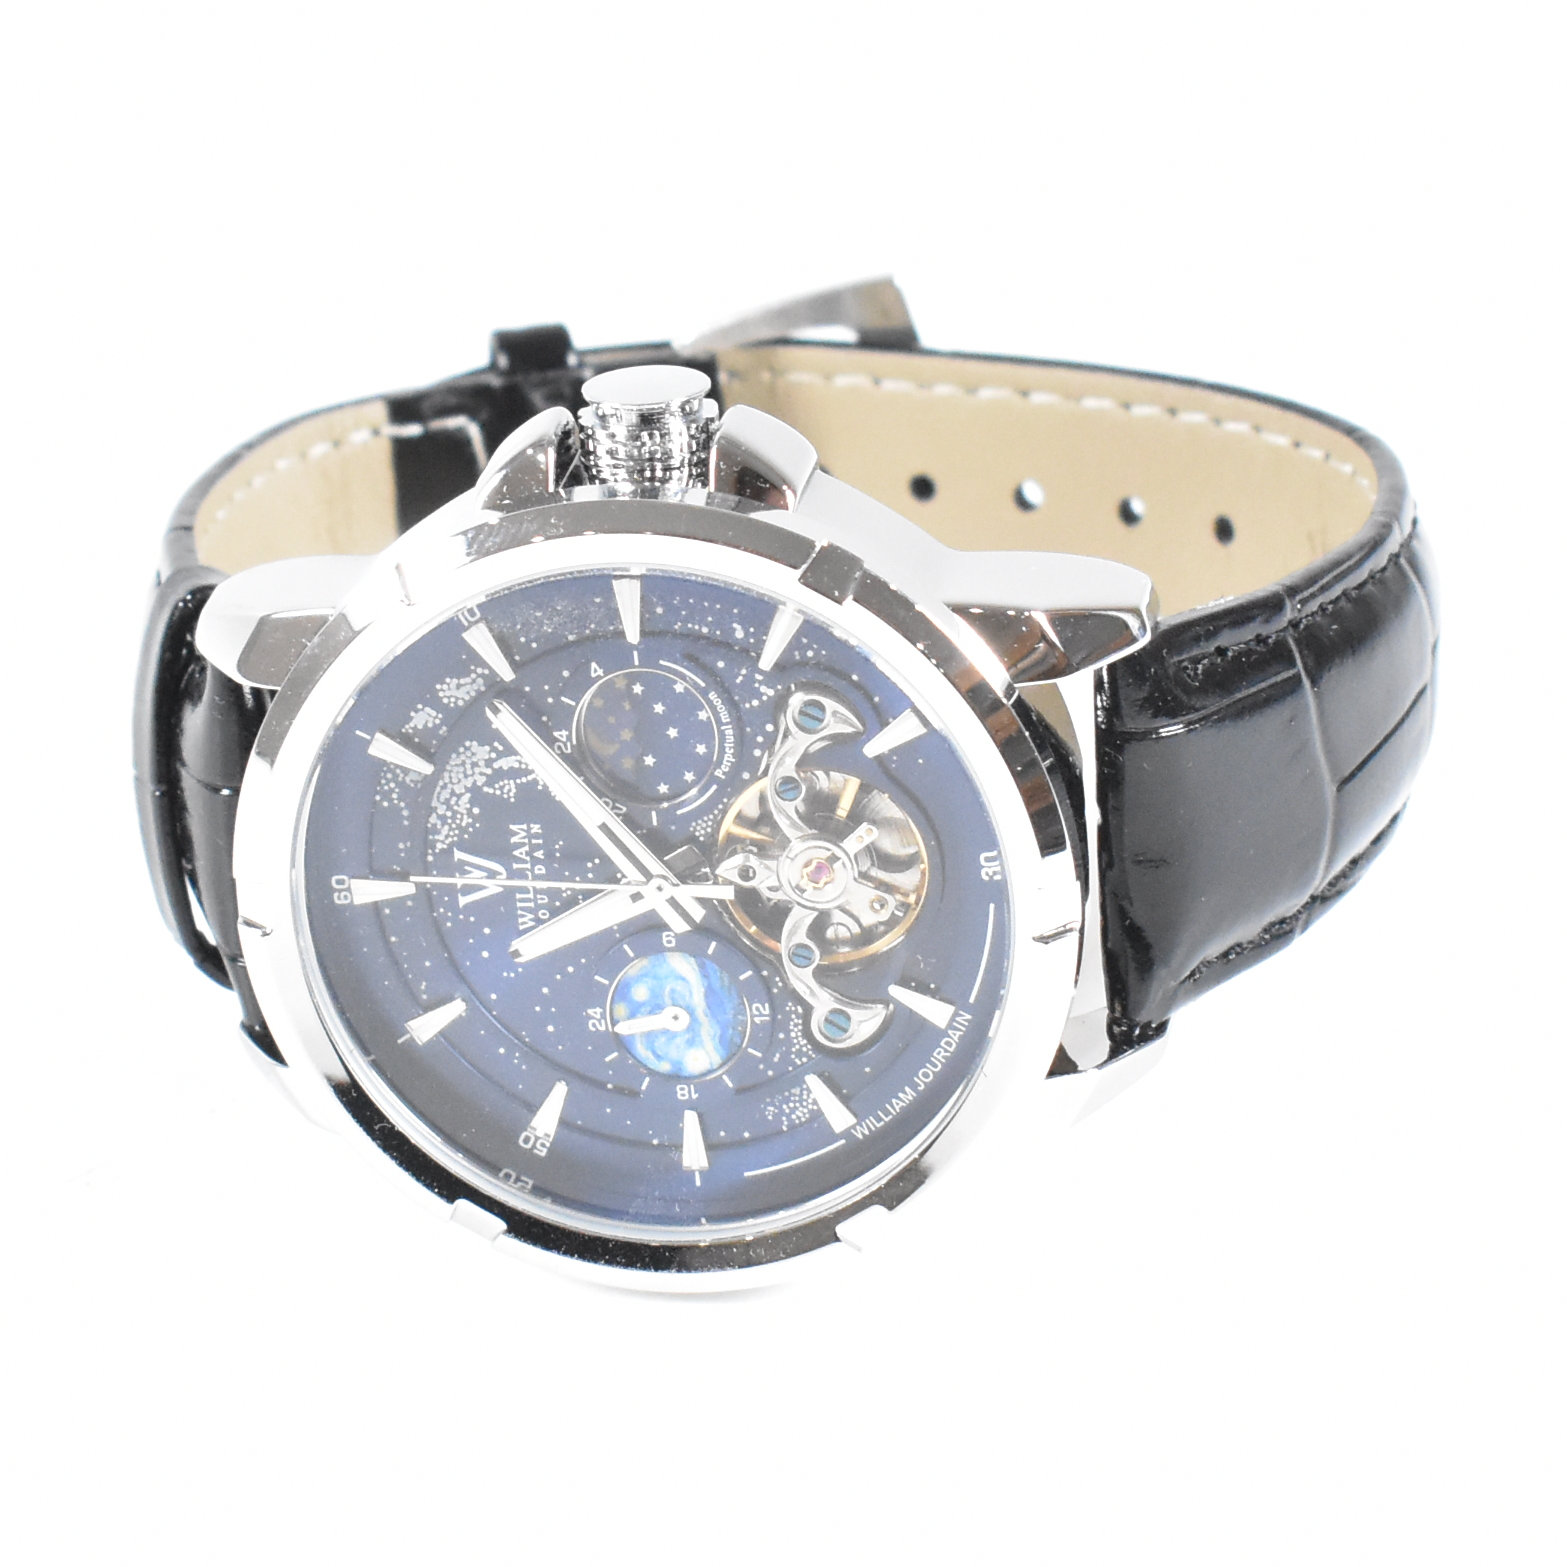 MENS CASED WILLIAM JOURDAIN AUTOMATIC WATCH - Image 5 of 7